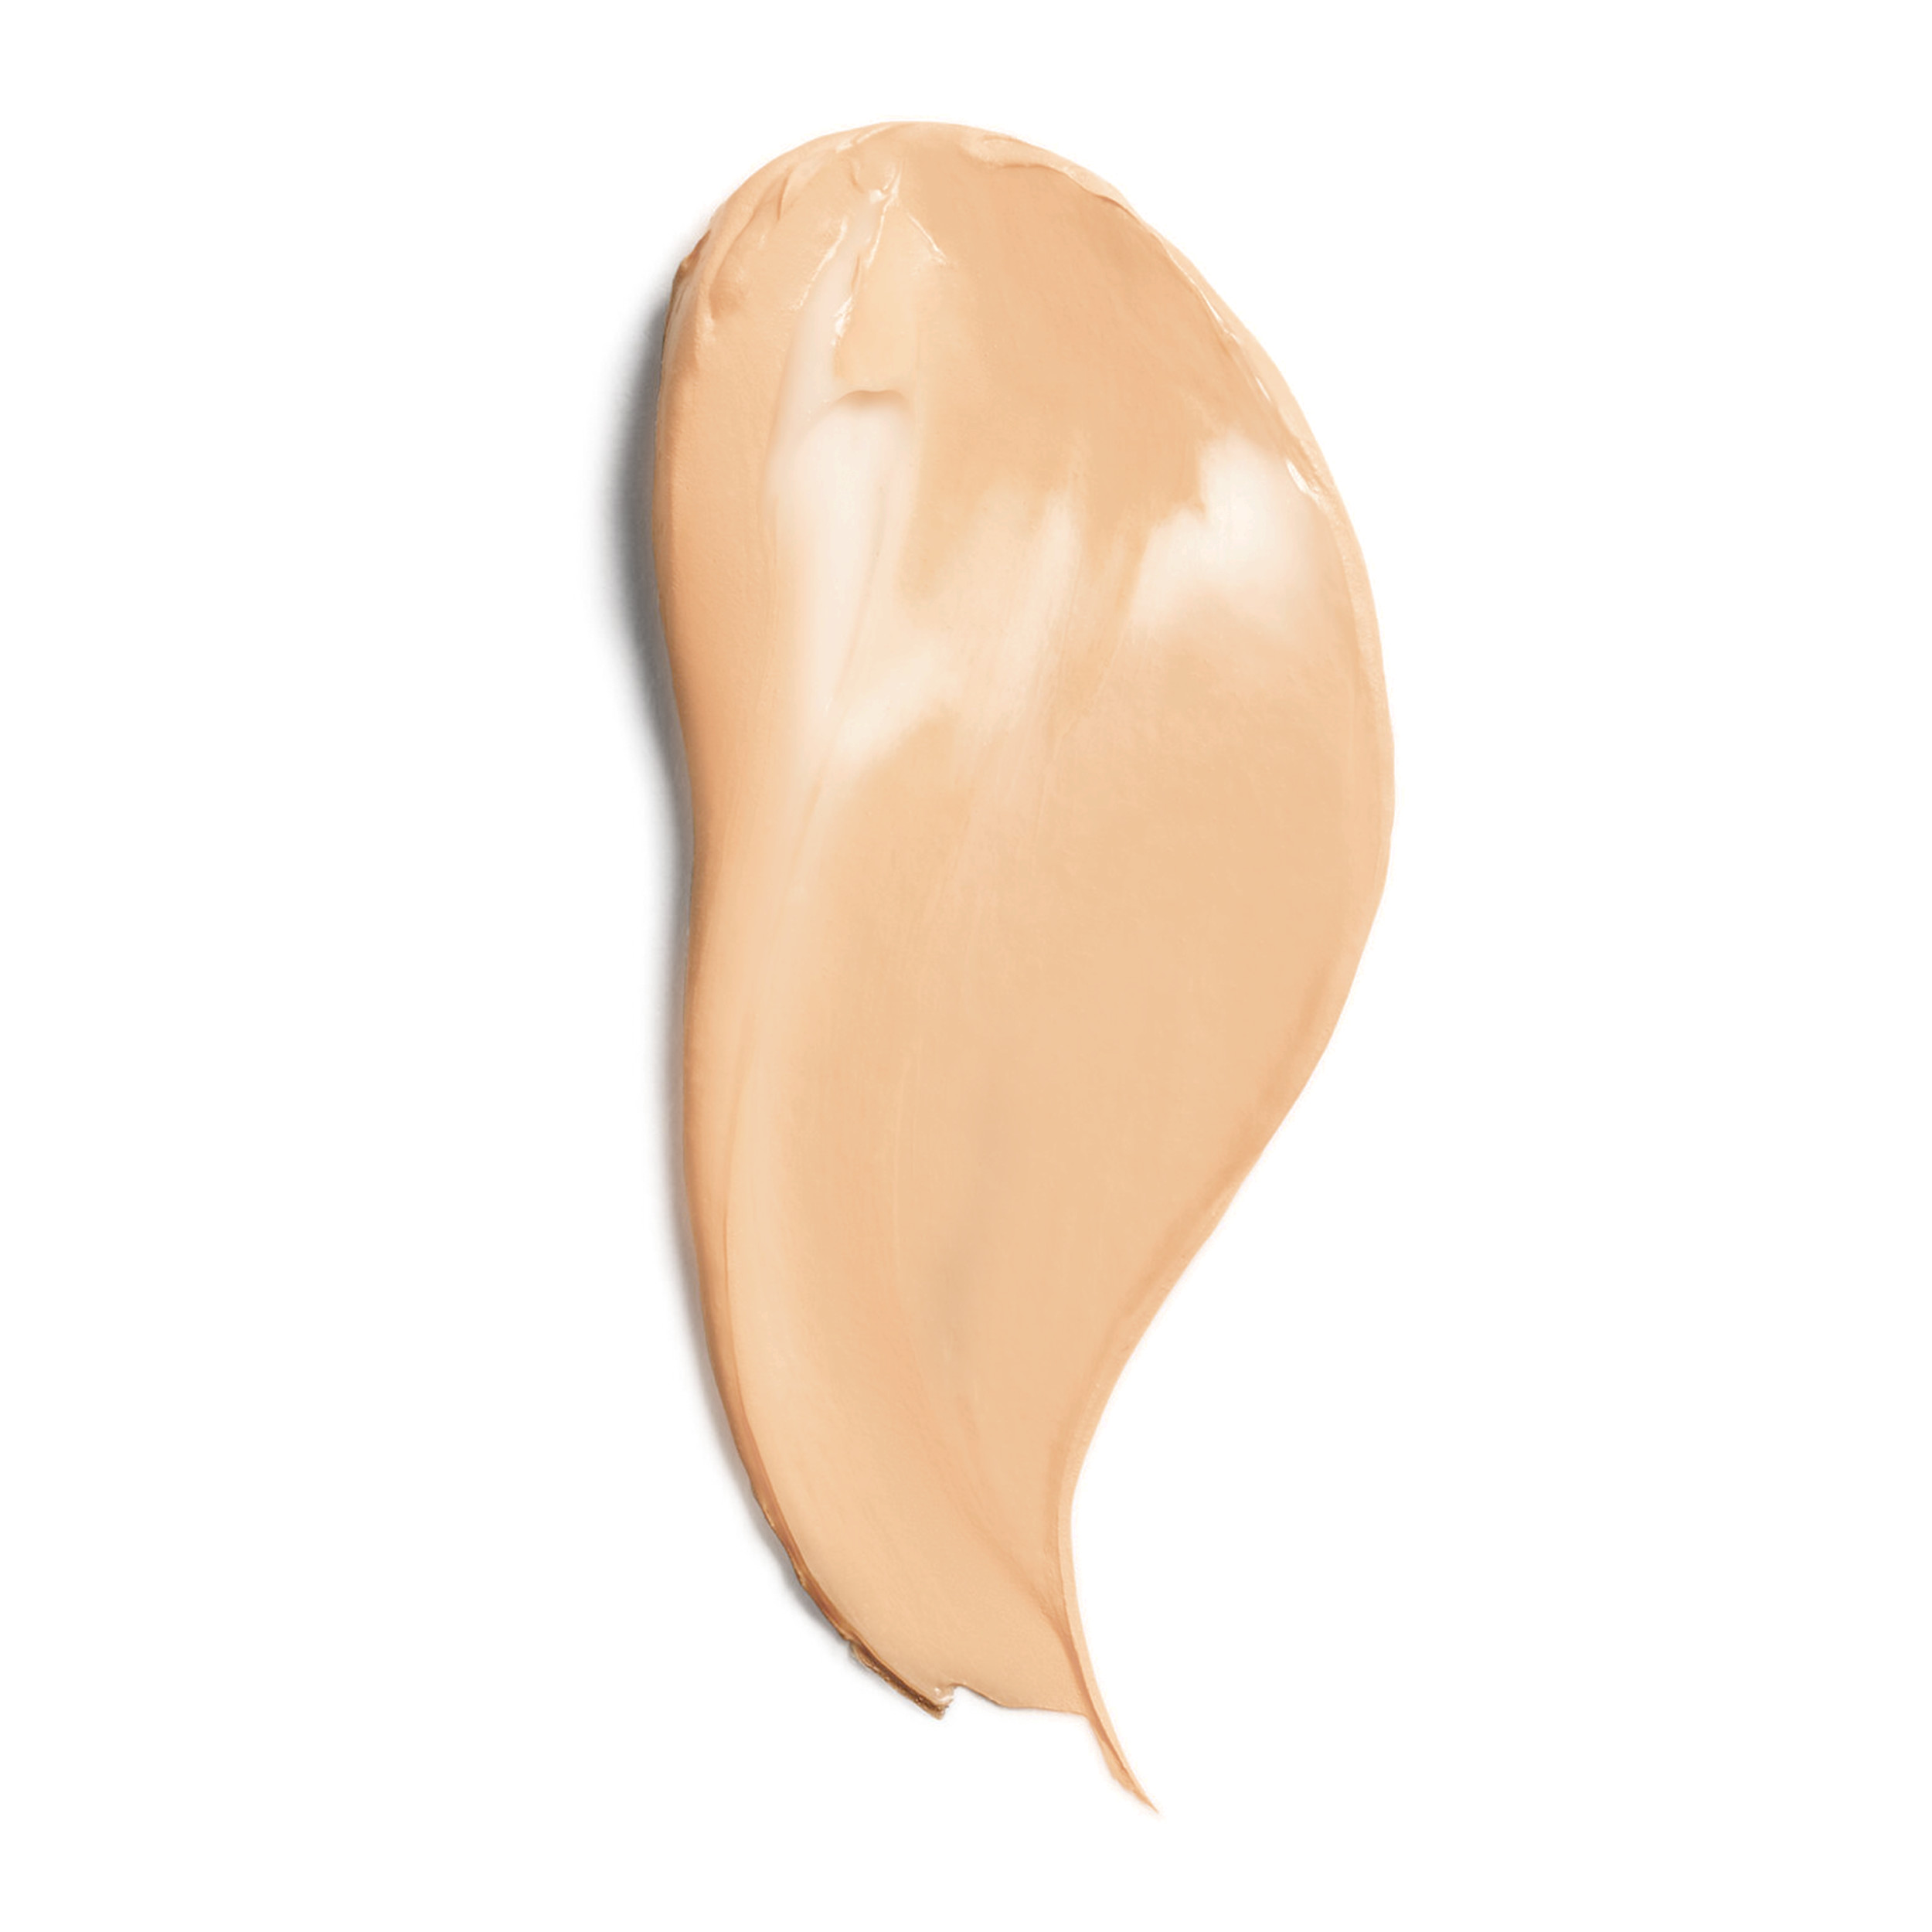 COVERGIRL + OLAY Simply Ageless Instant Wrinkle-Defying Foundation with SPF 28, Warm Beige, 0.44 oz - image 3 of 9